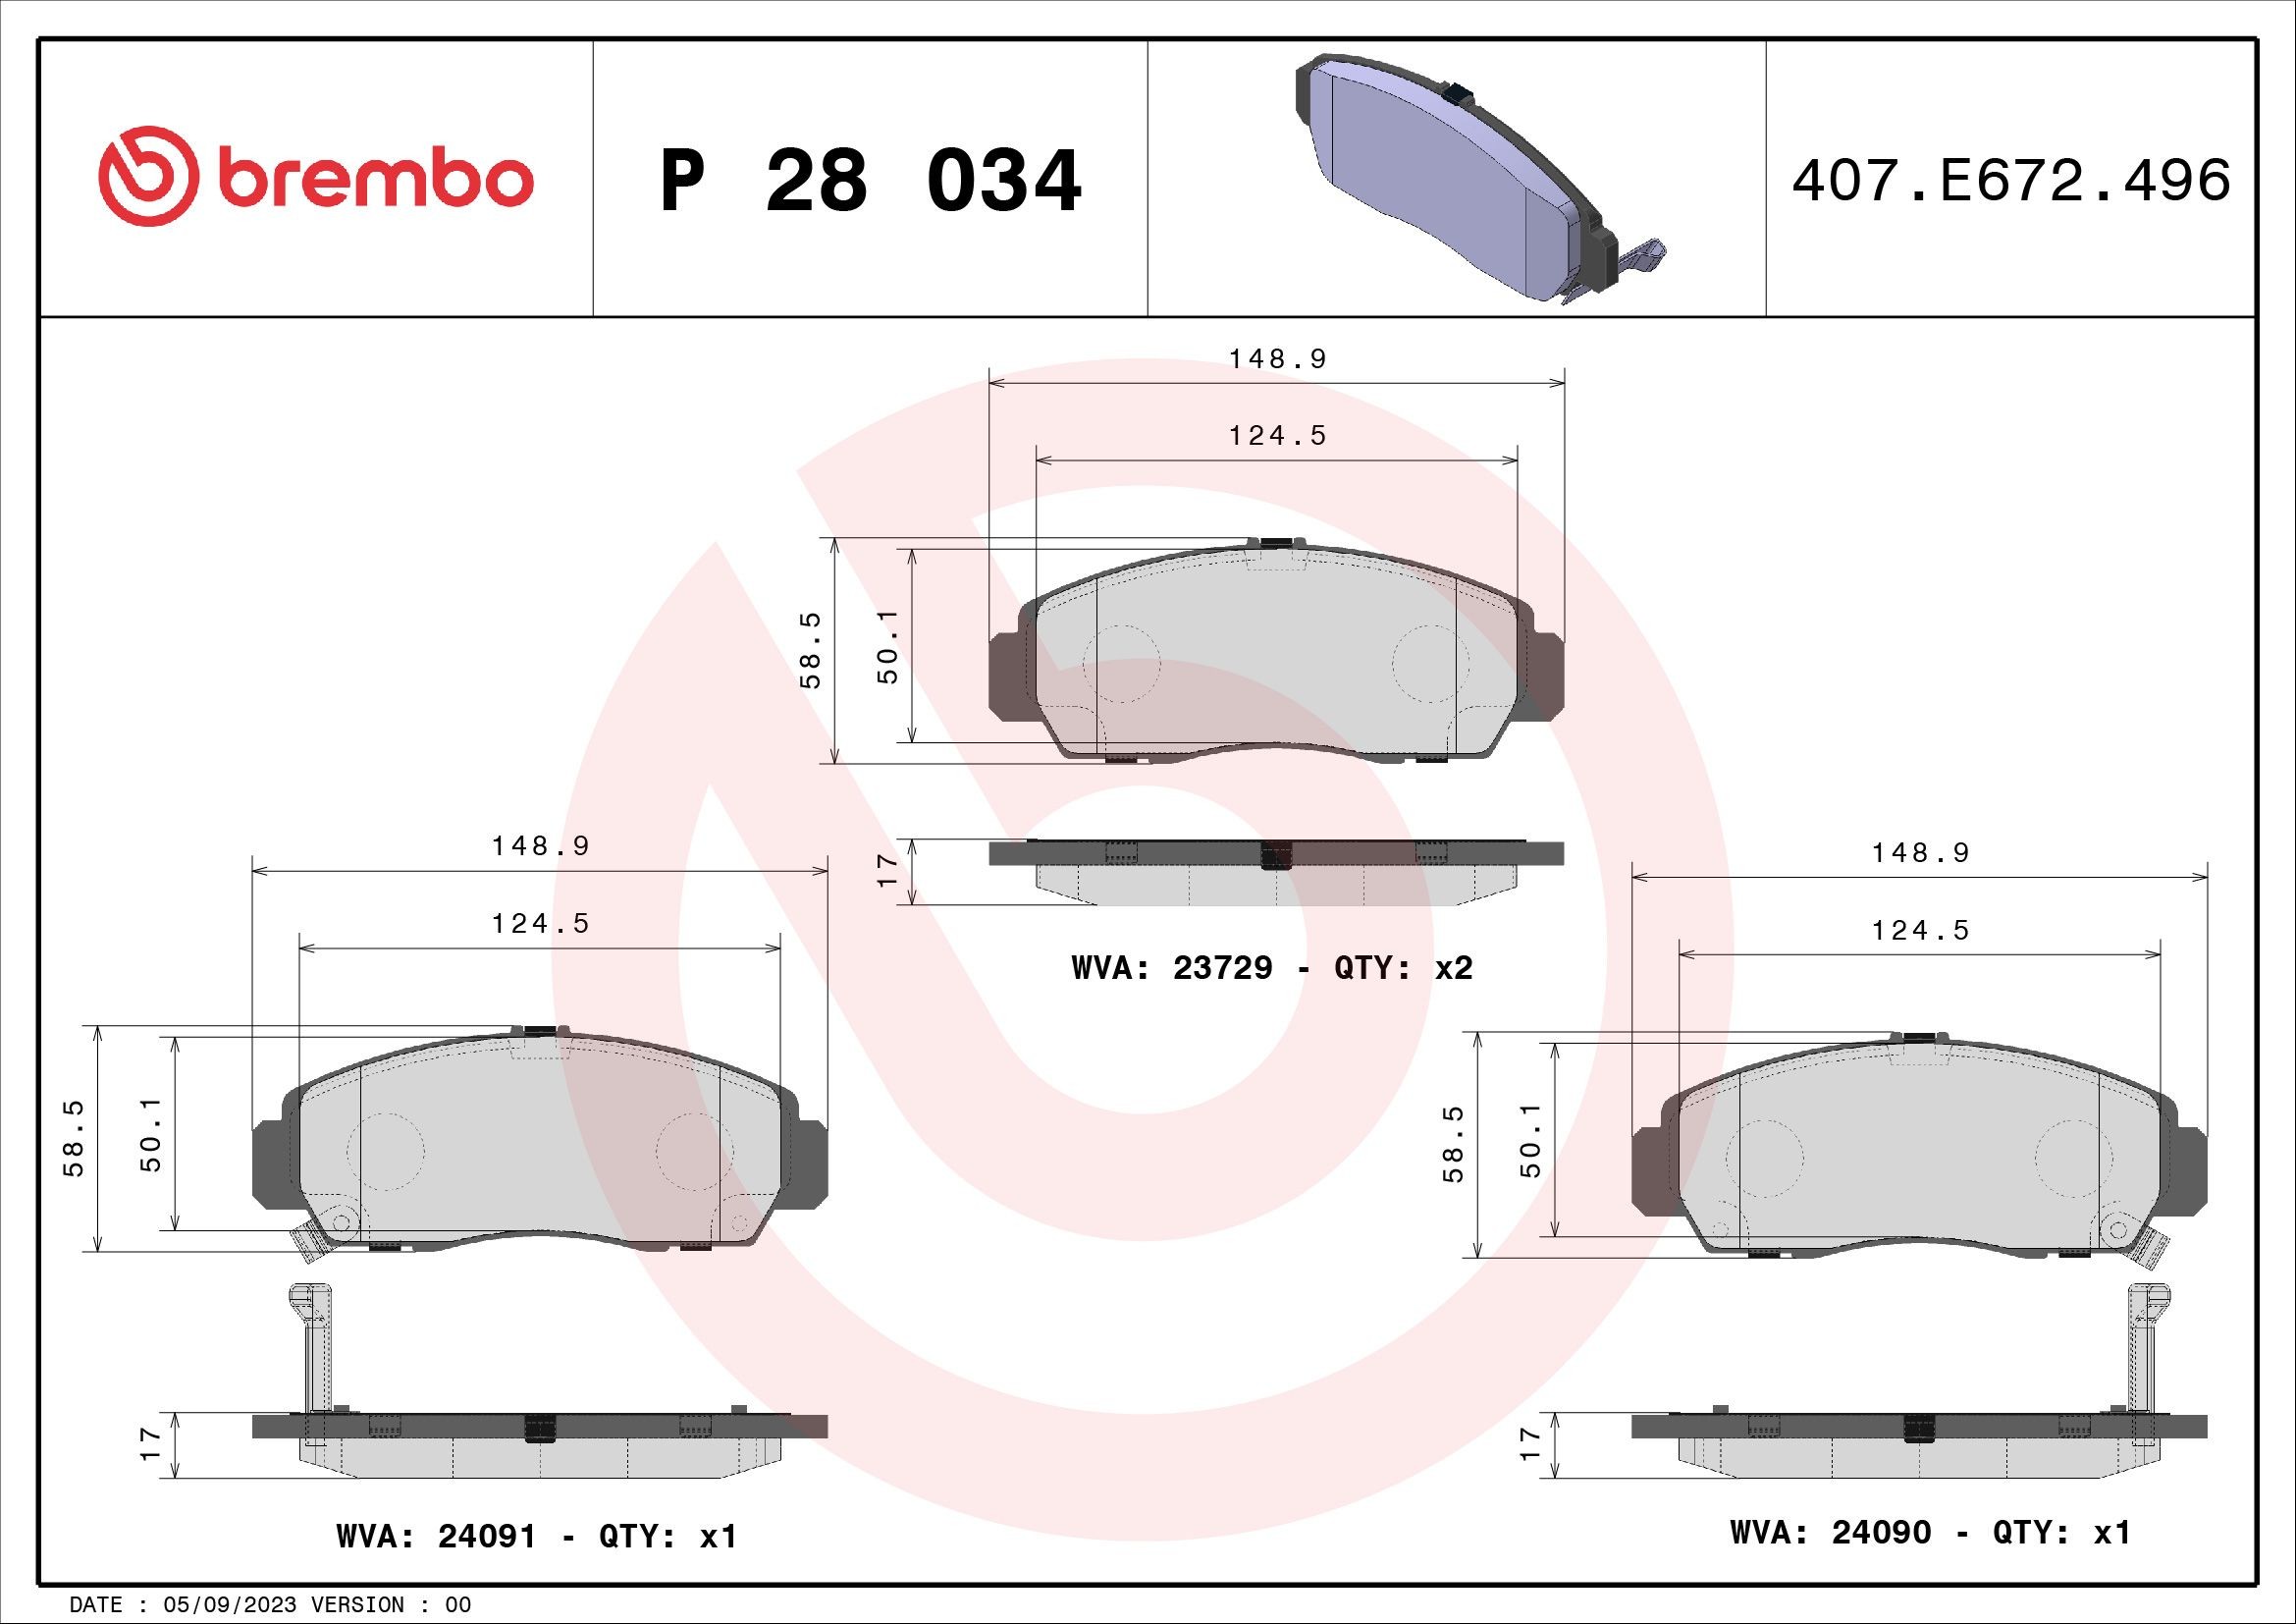 BREMBO P 28 034 Brake pad set with acoustic wear warning, without accessories